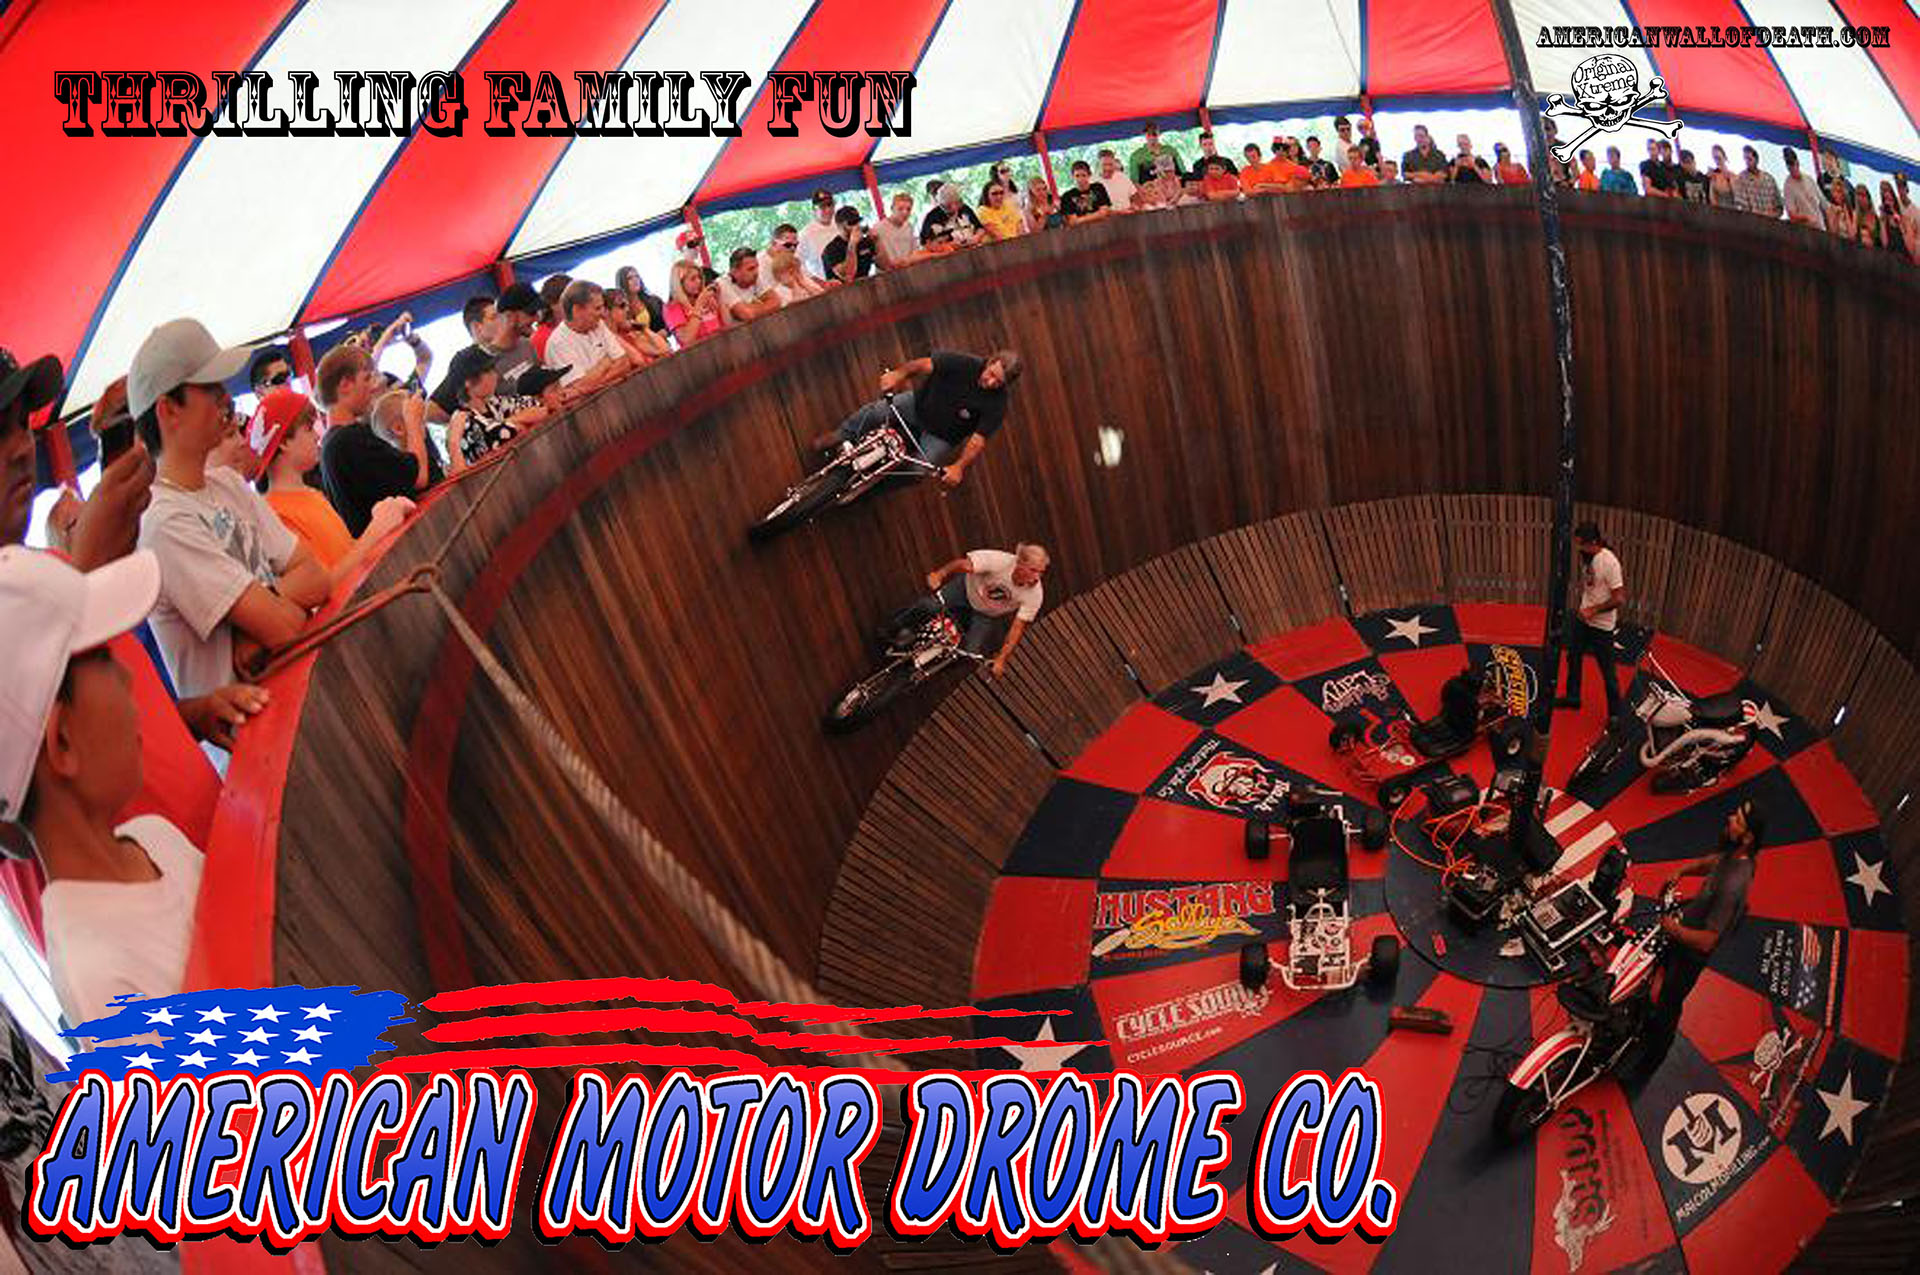 American MotorDrome Wall of Death Motorcycle Thrill Show